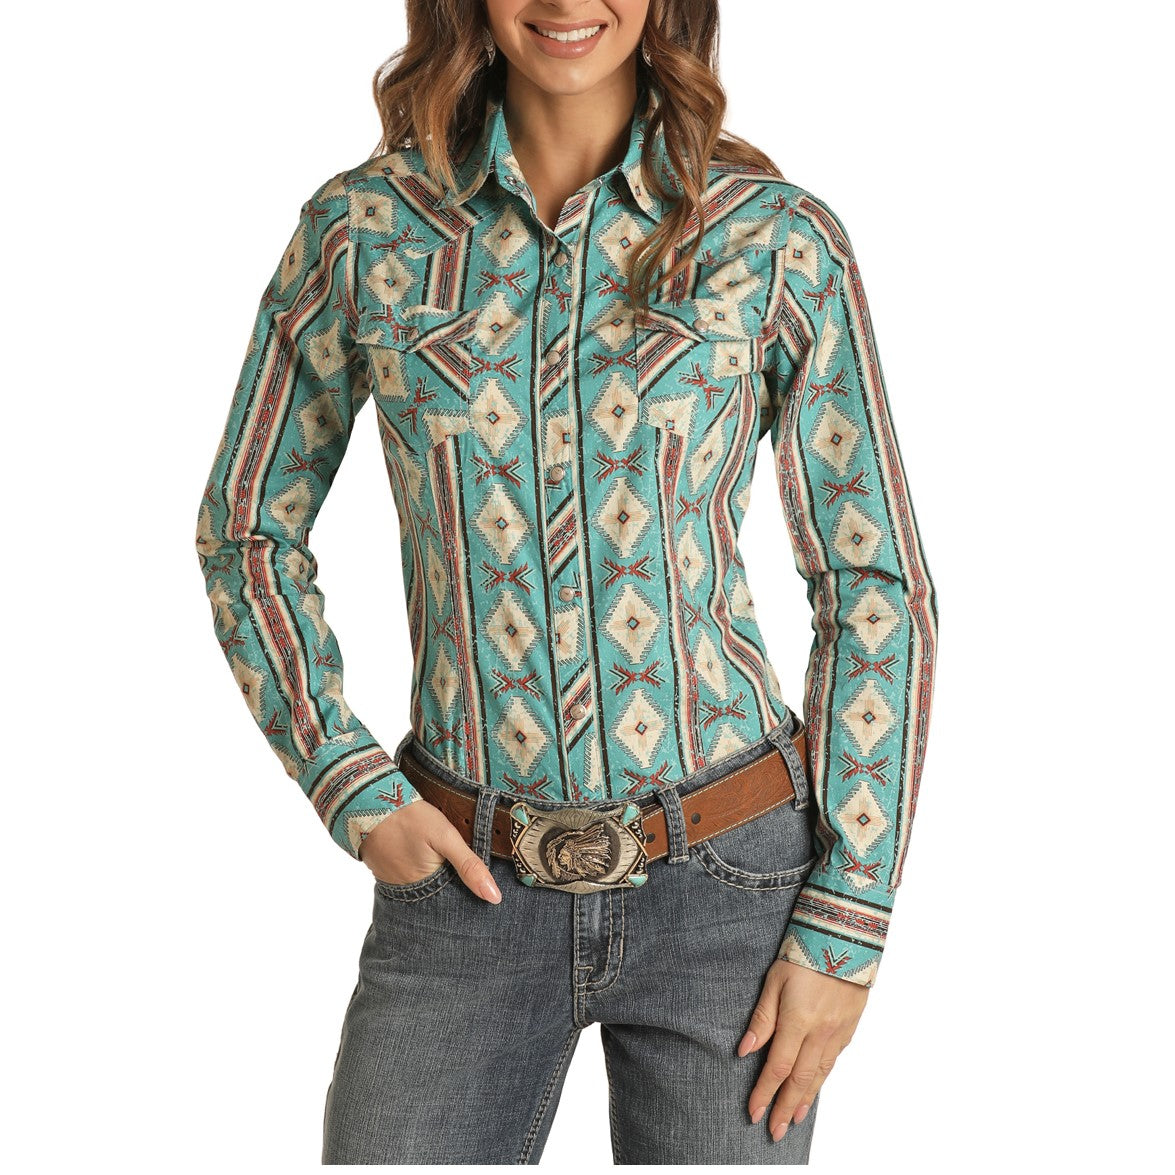 Rock & Roll Cowgirl Ladies Turquoise Aztec Print Snap Shirt B4S1313-22